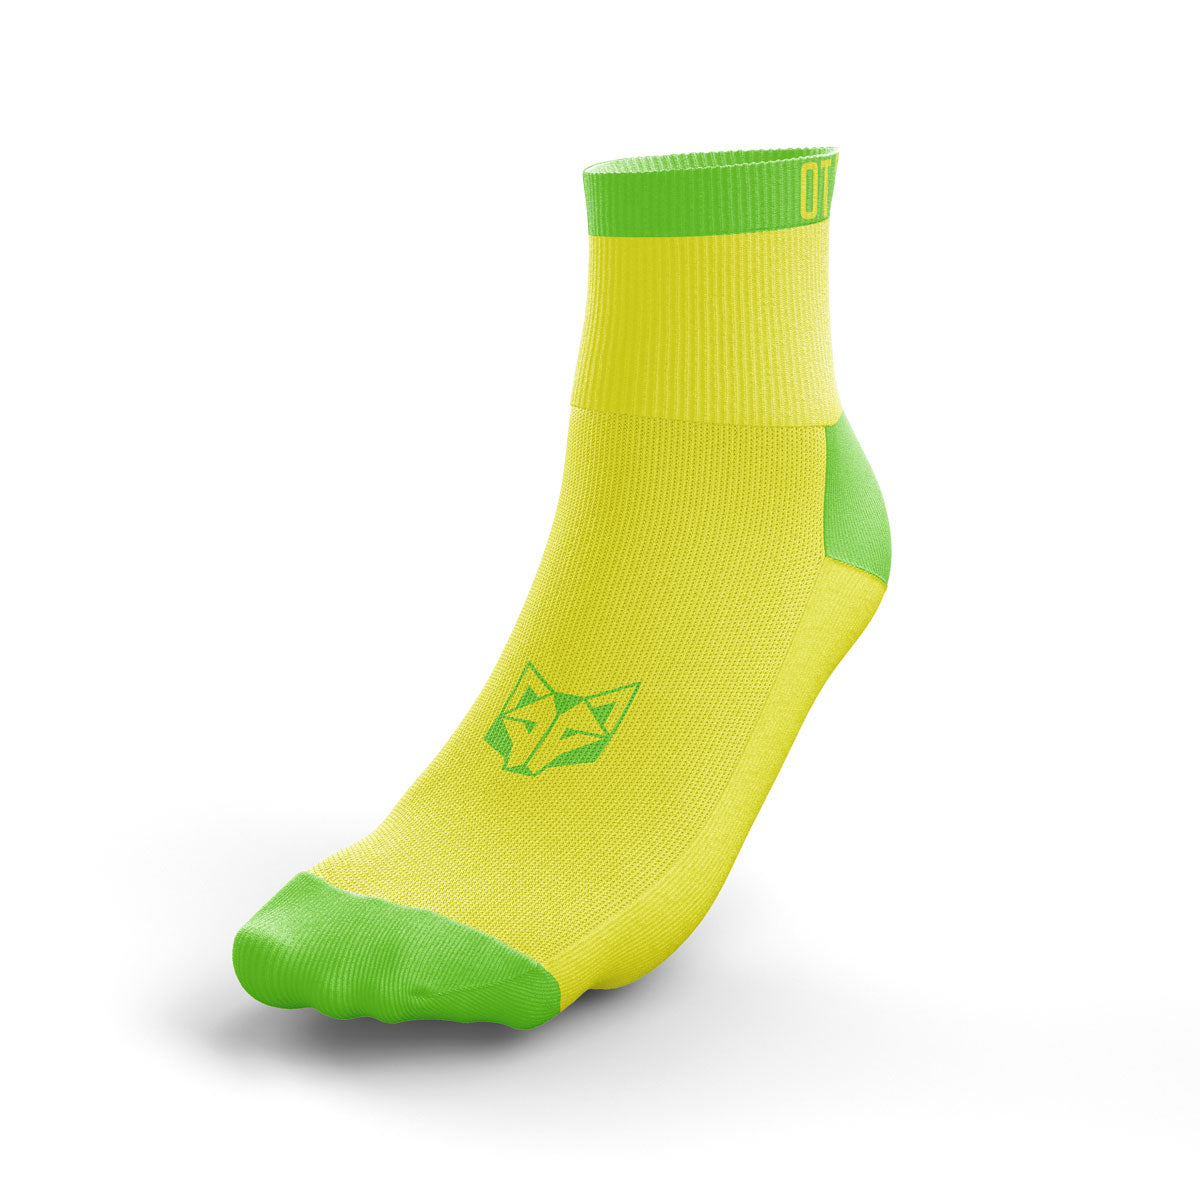 Calzini Multisport Low Cut - Fluo Yellow & Fluo Green (Outlet)